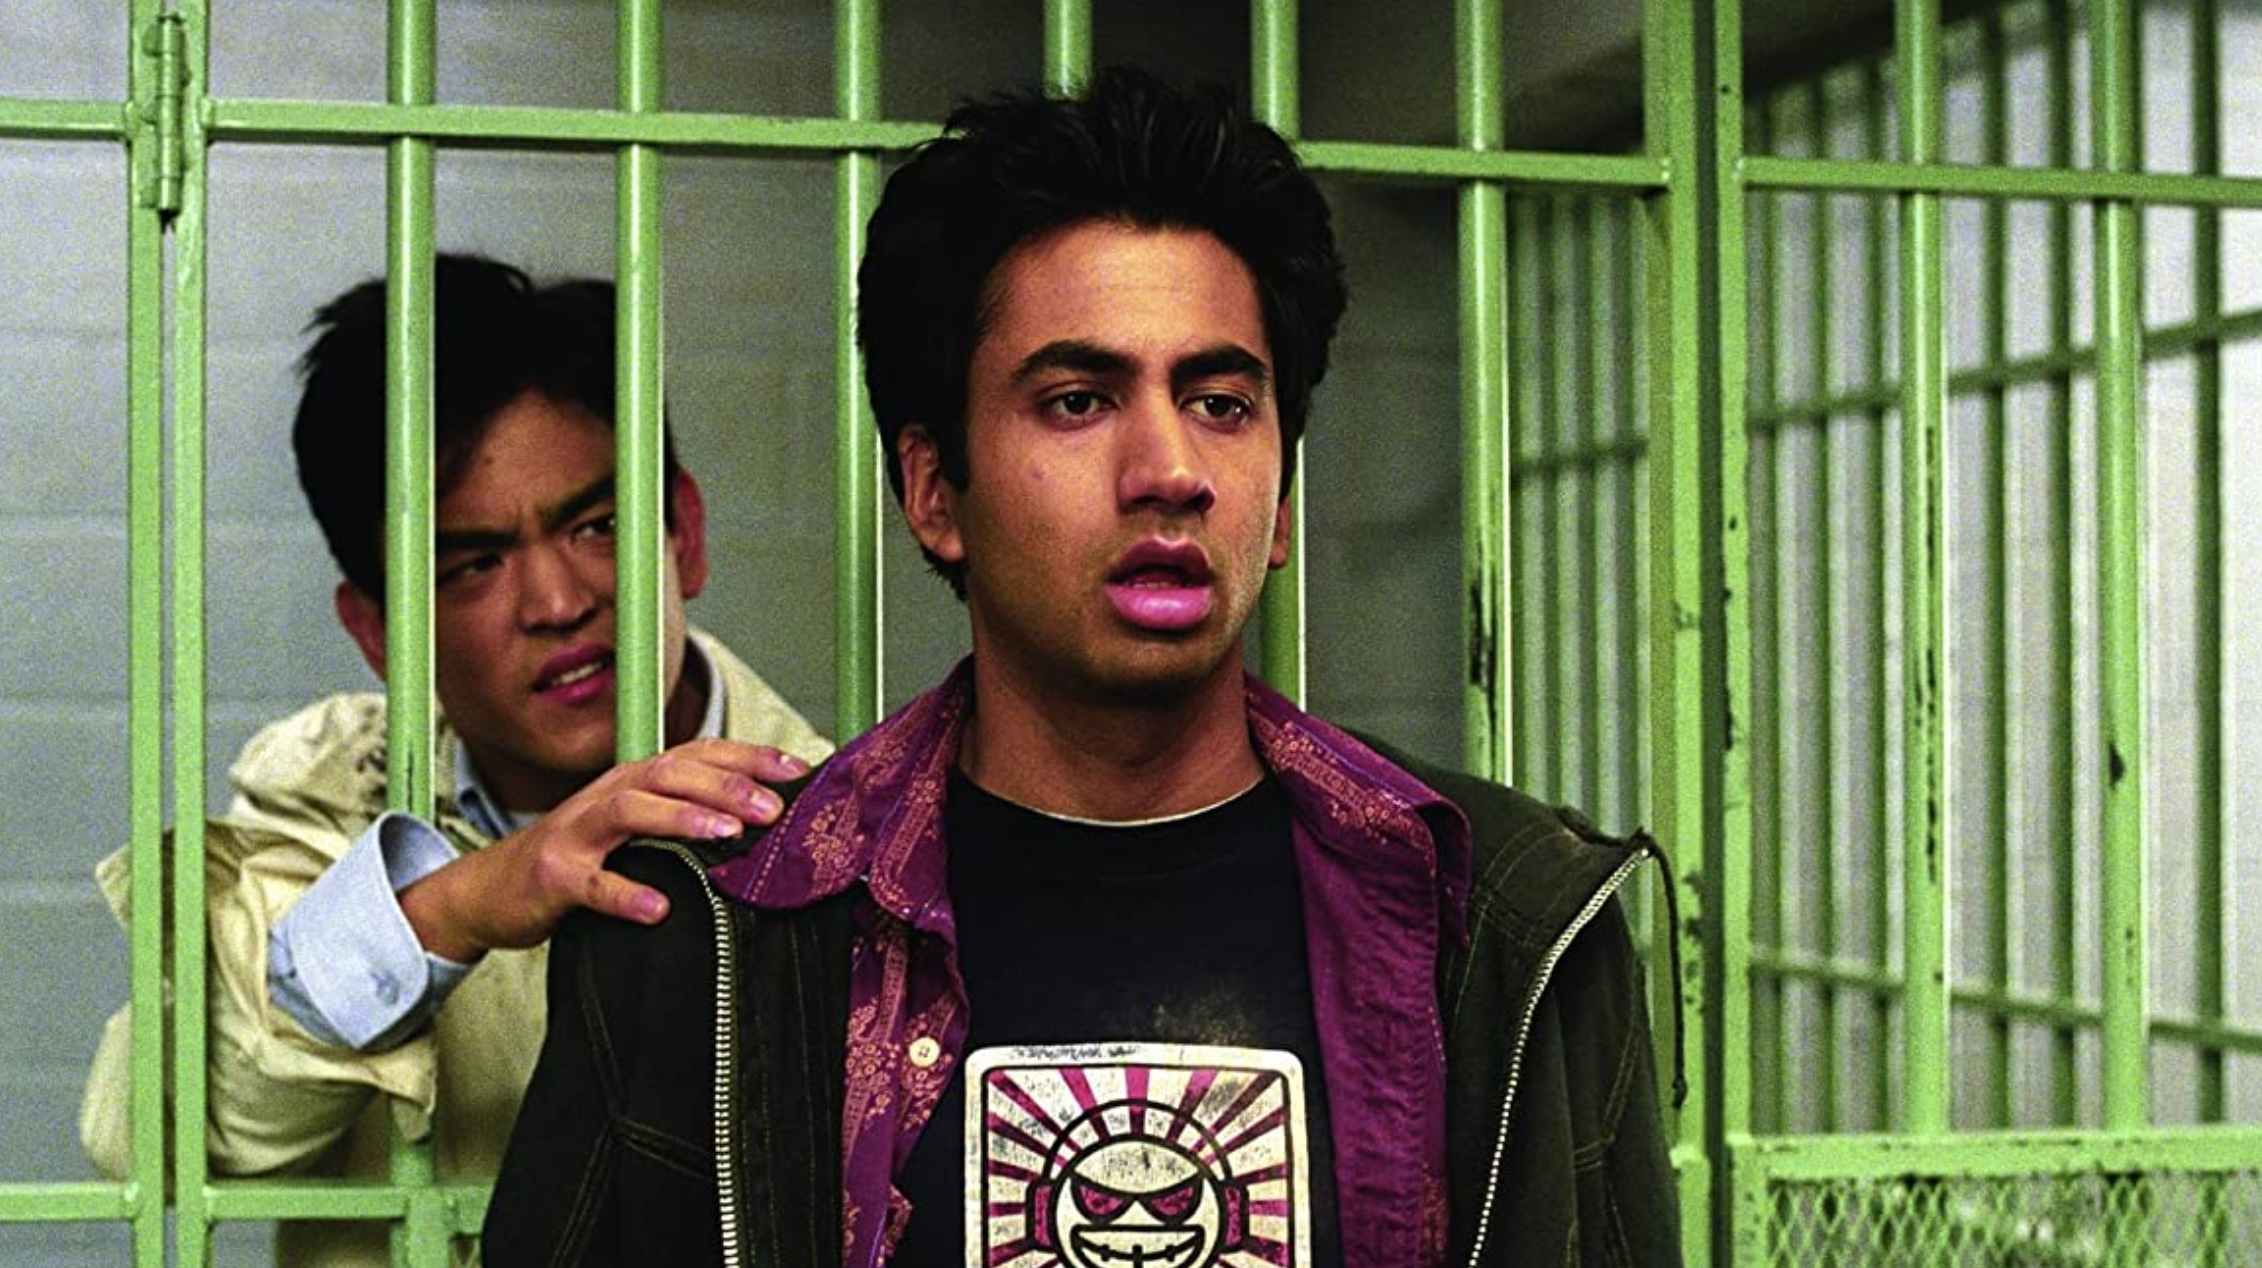 kumar in front of a jail cell and harold is in the cell